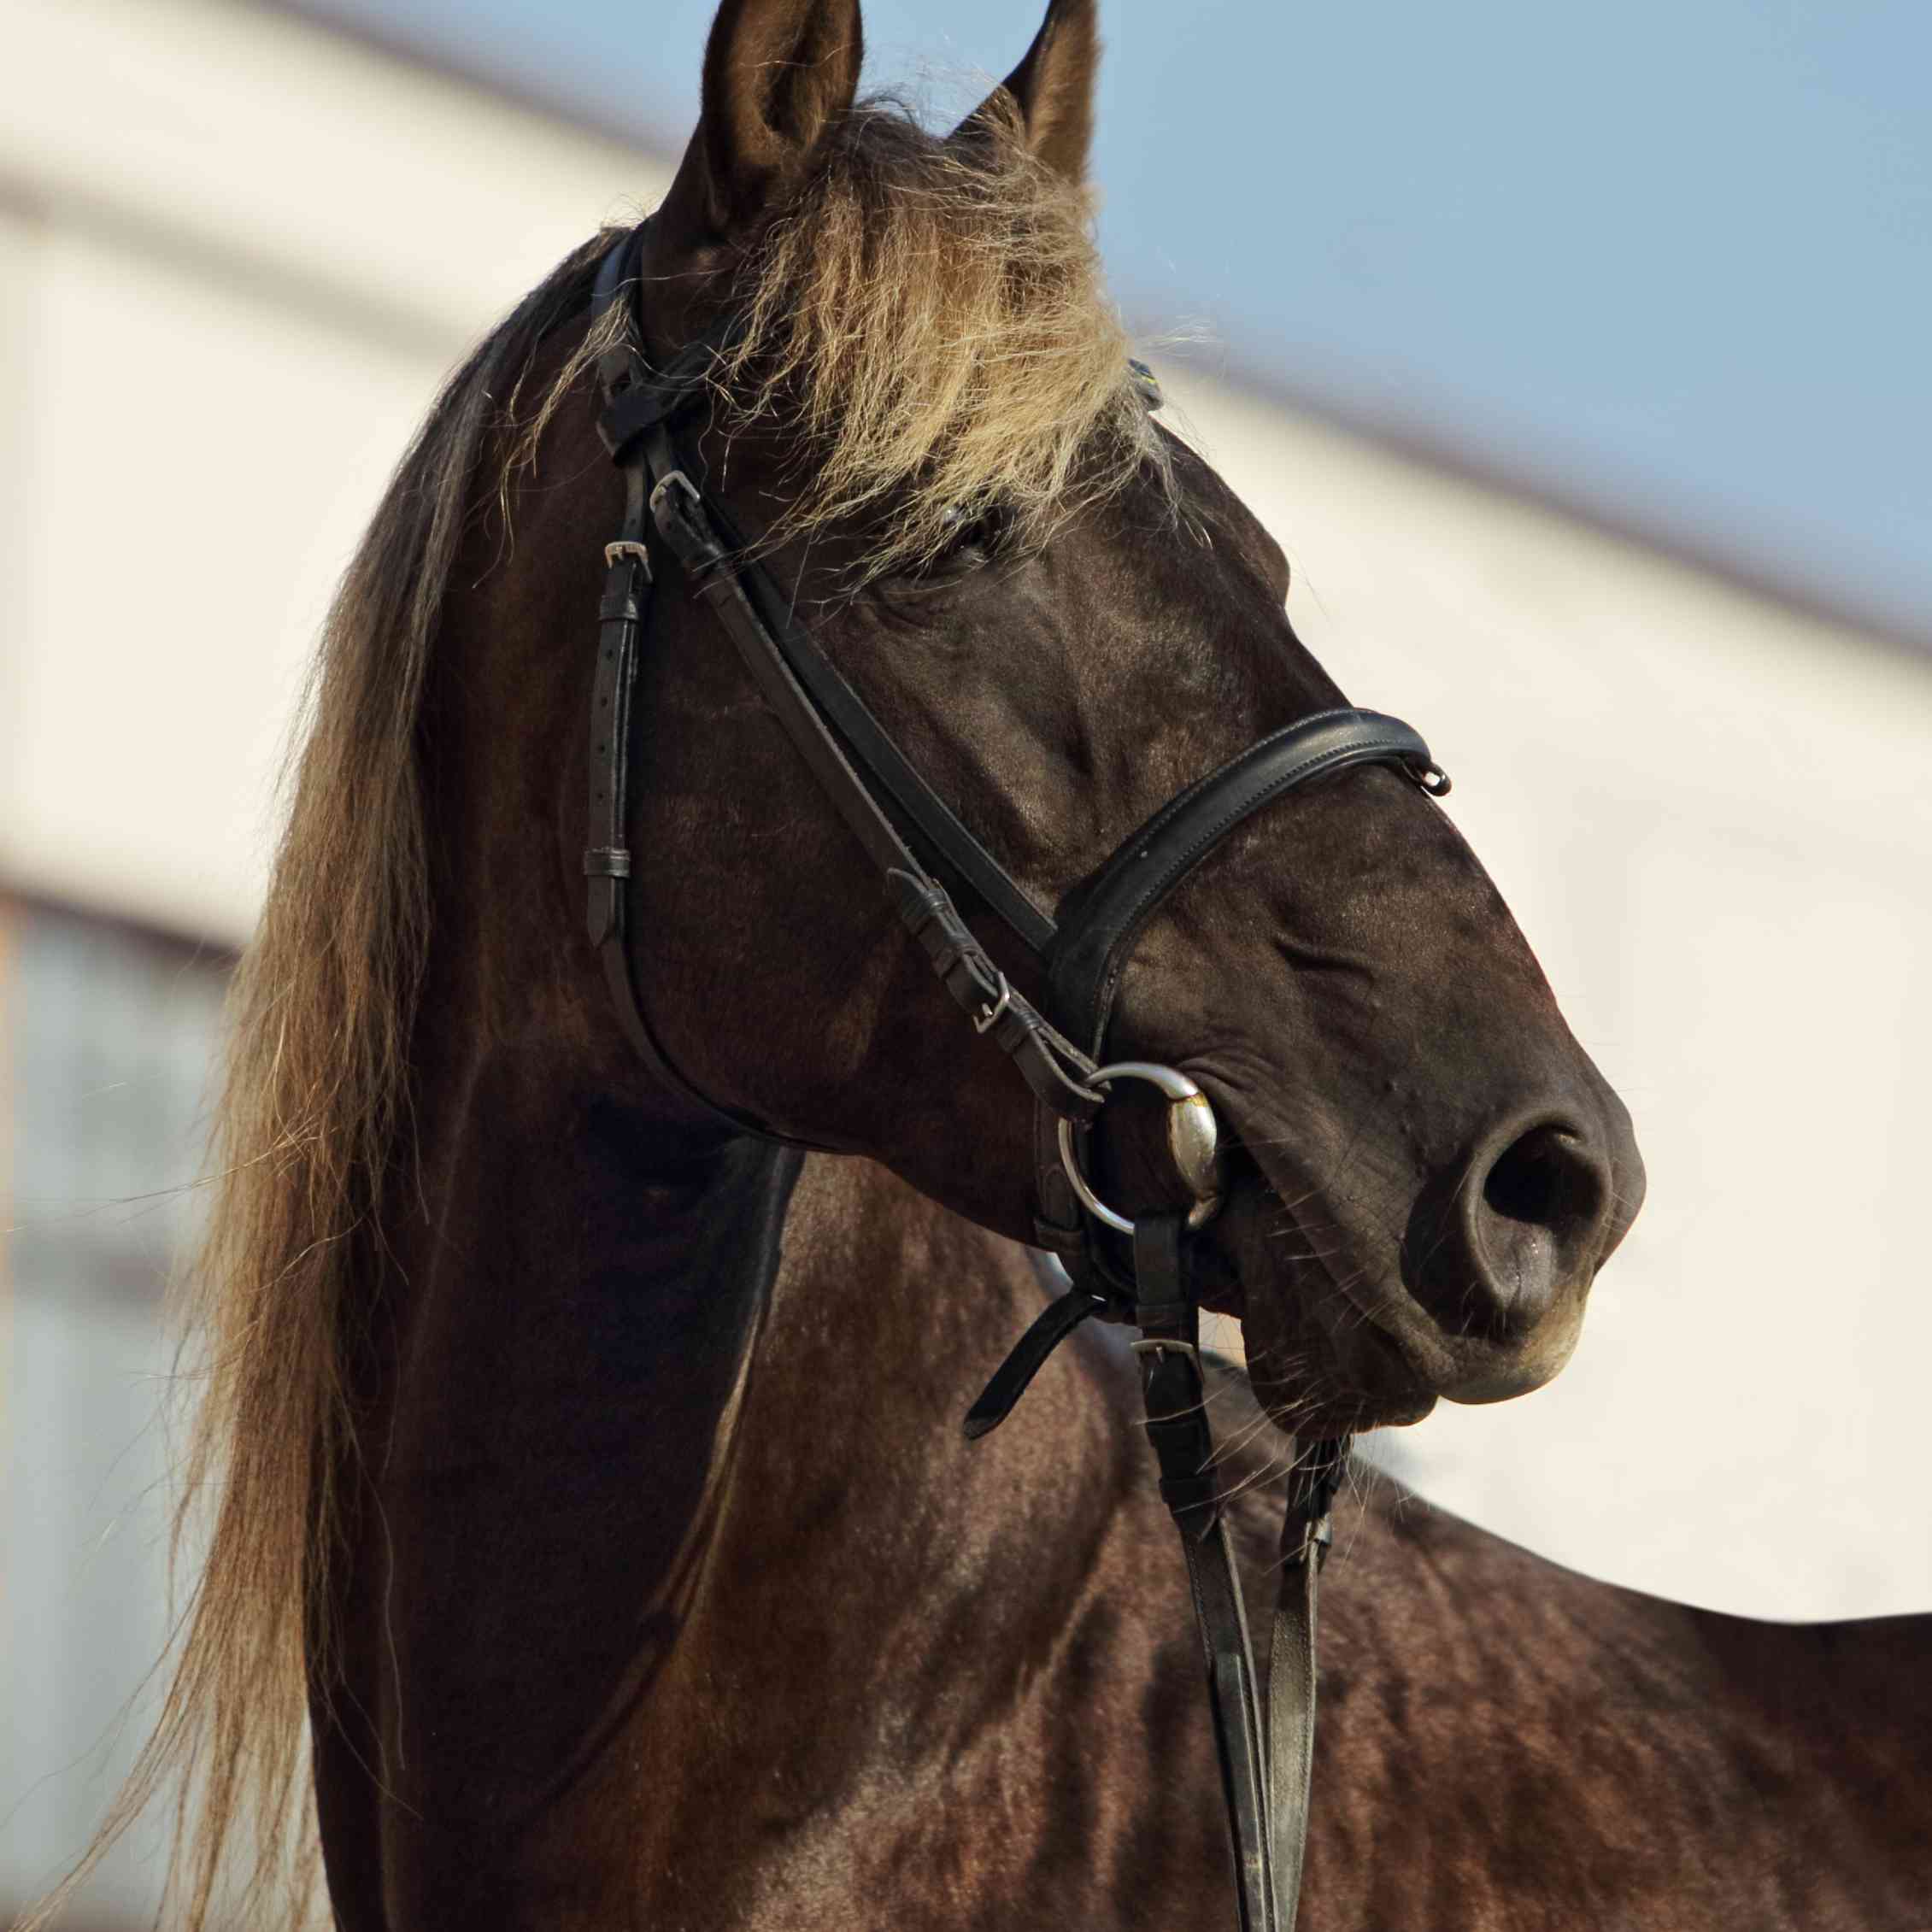 Rocky Mountain Horse wearing an English bridle